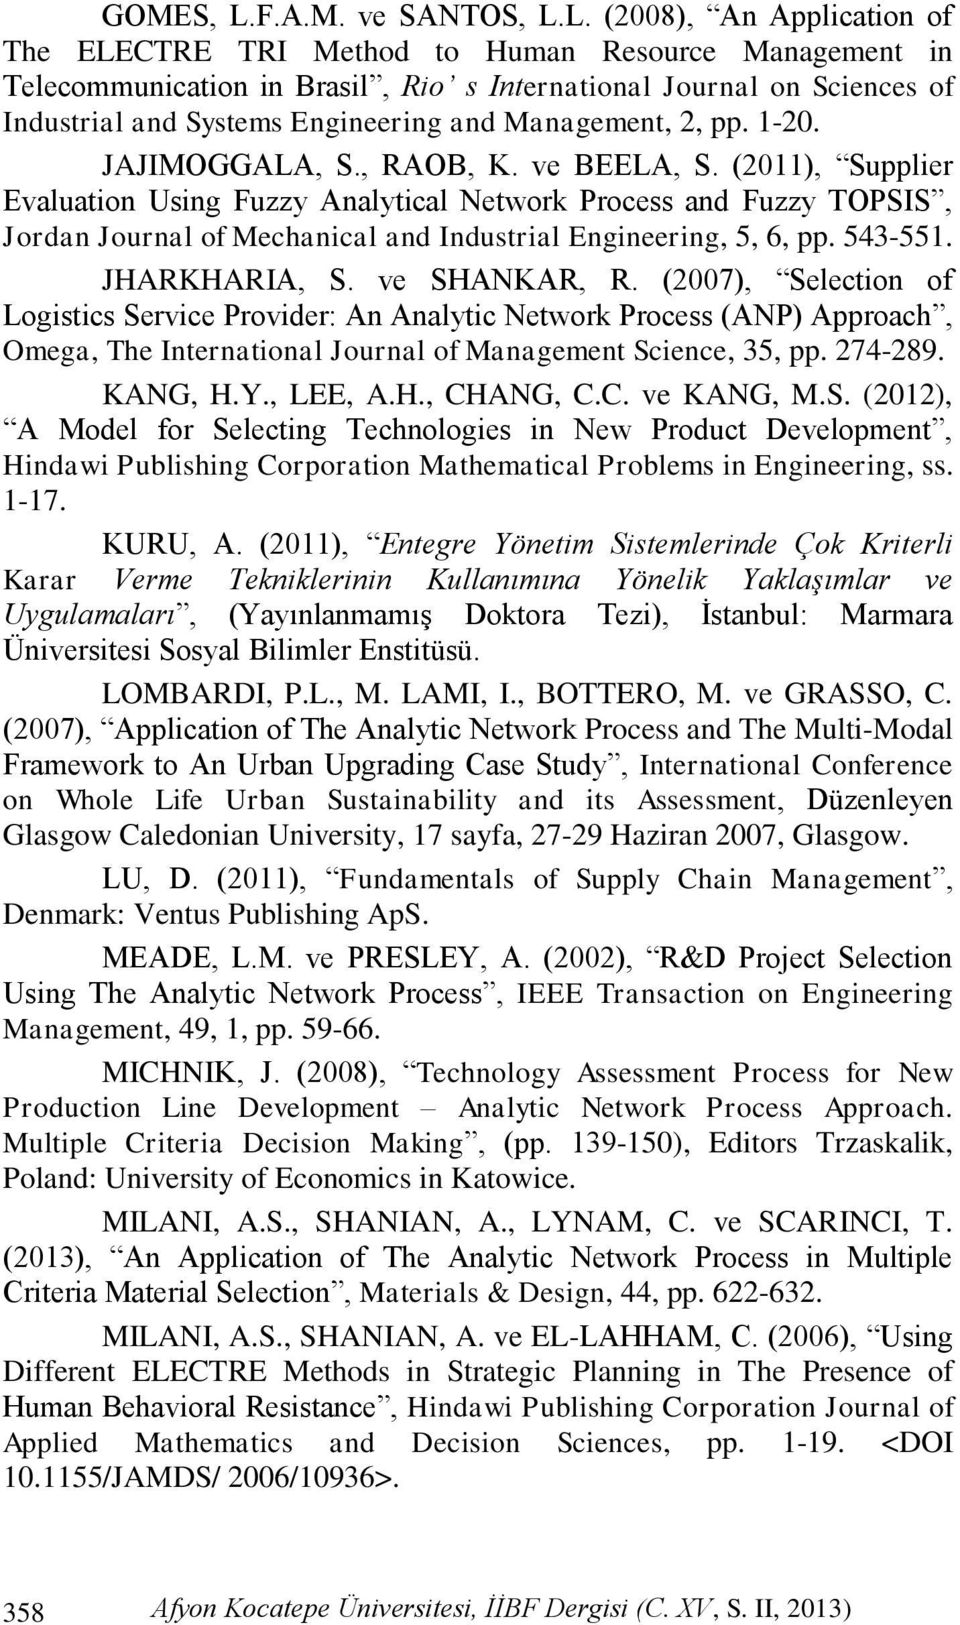 L. (2008), An Application of The ELECTRE TRI Method to Human Resource Management in Telecommunication in Brasil, Rio s International Journal on Sciences of Industrial and Systems Engineering and